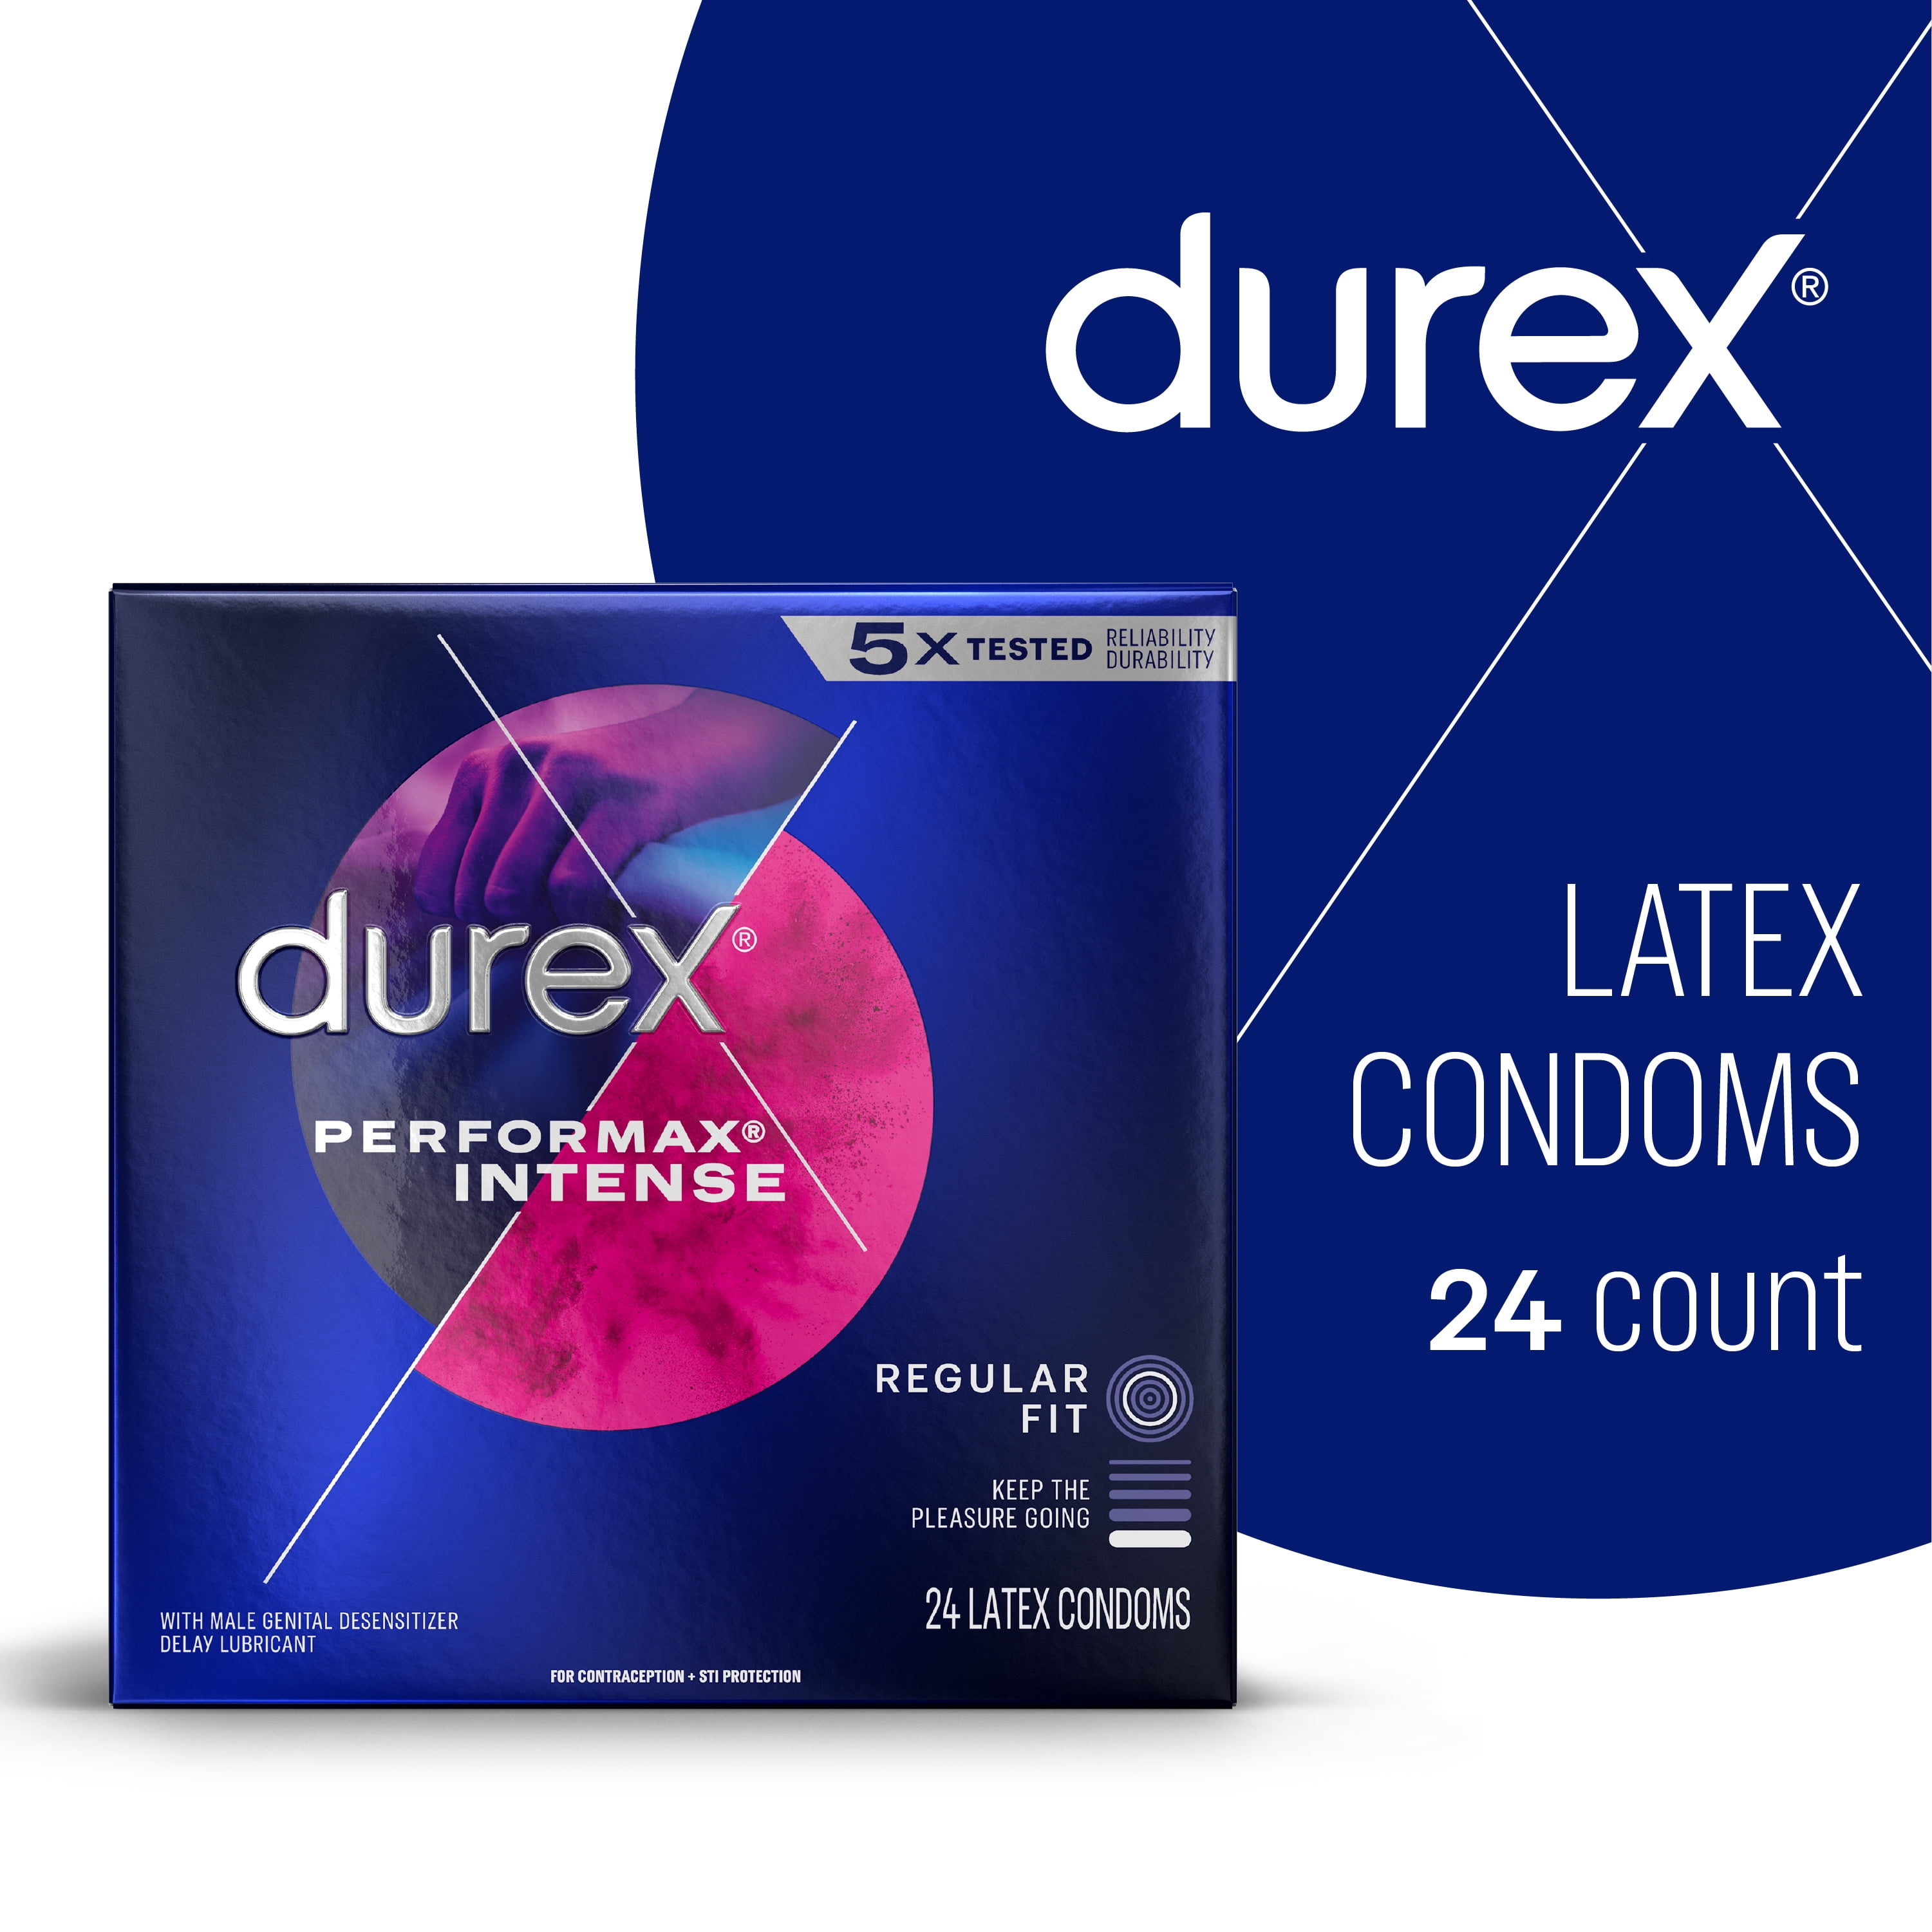 Durex Performax Intense Condoms, Ultra Fine, Ribbed, Dotted with